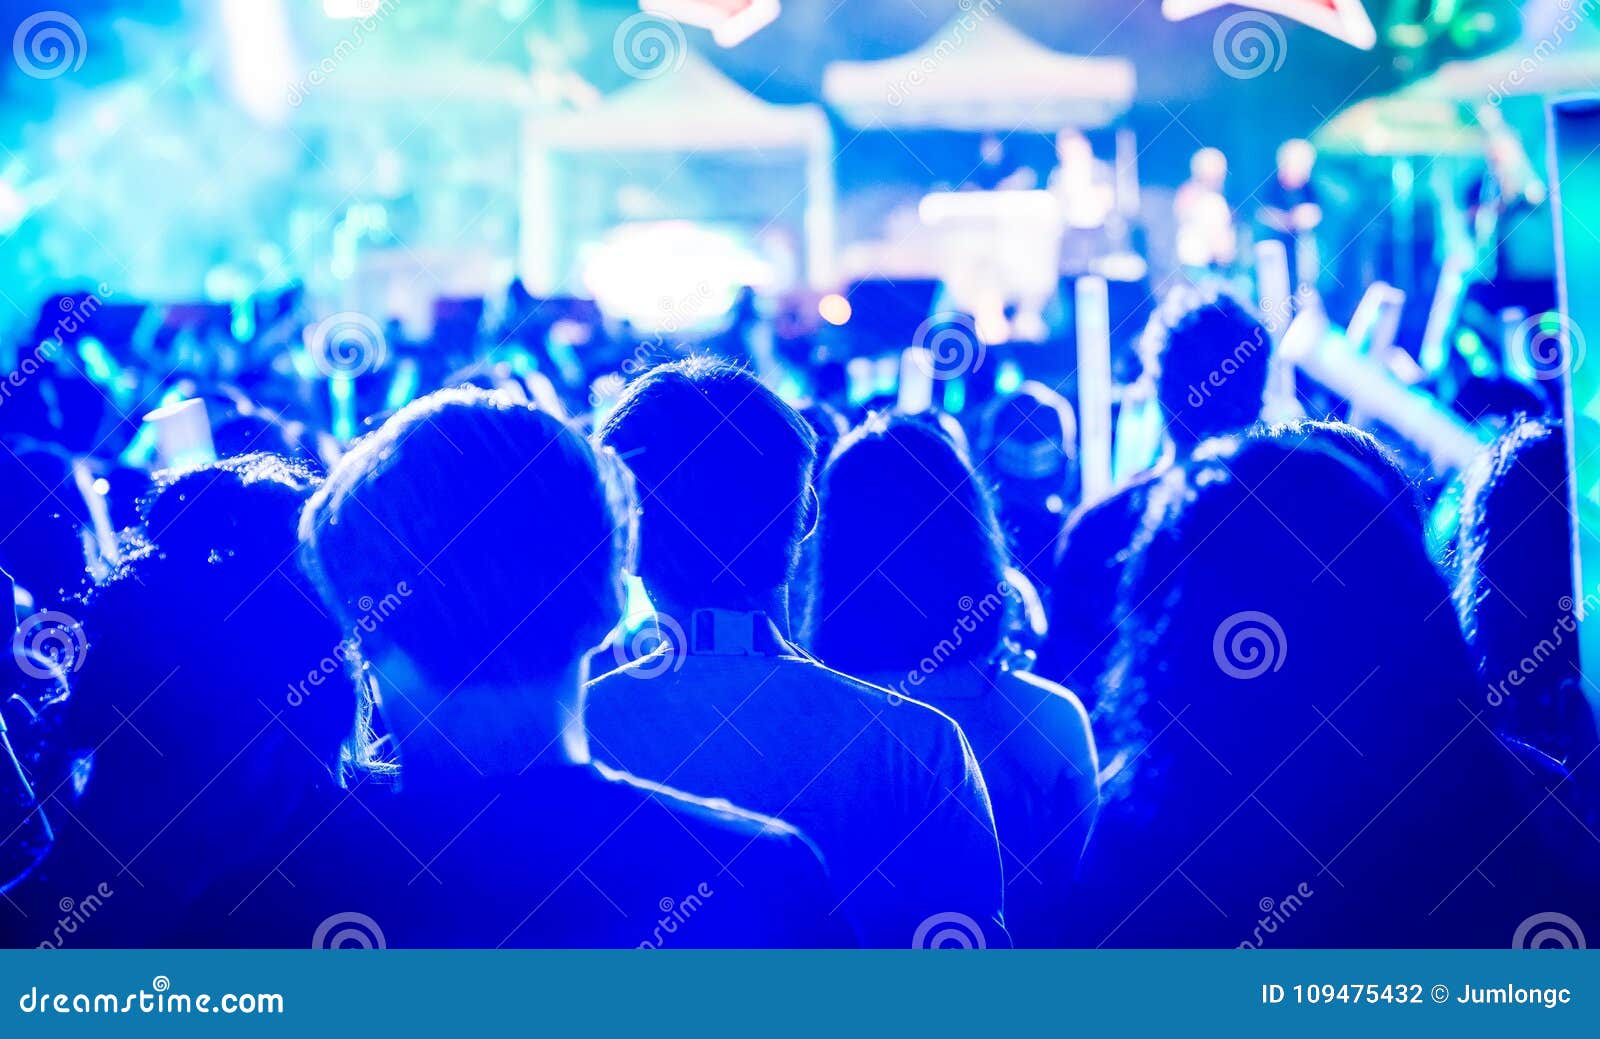 Many People are in Local Concert and All they Standing in Front of the ...